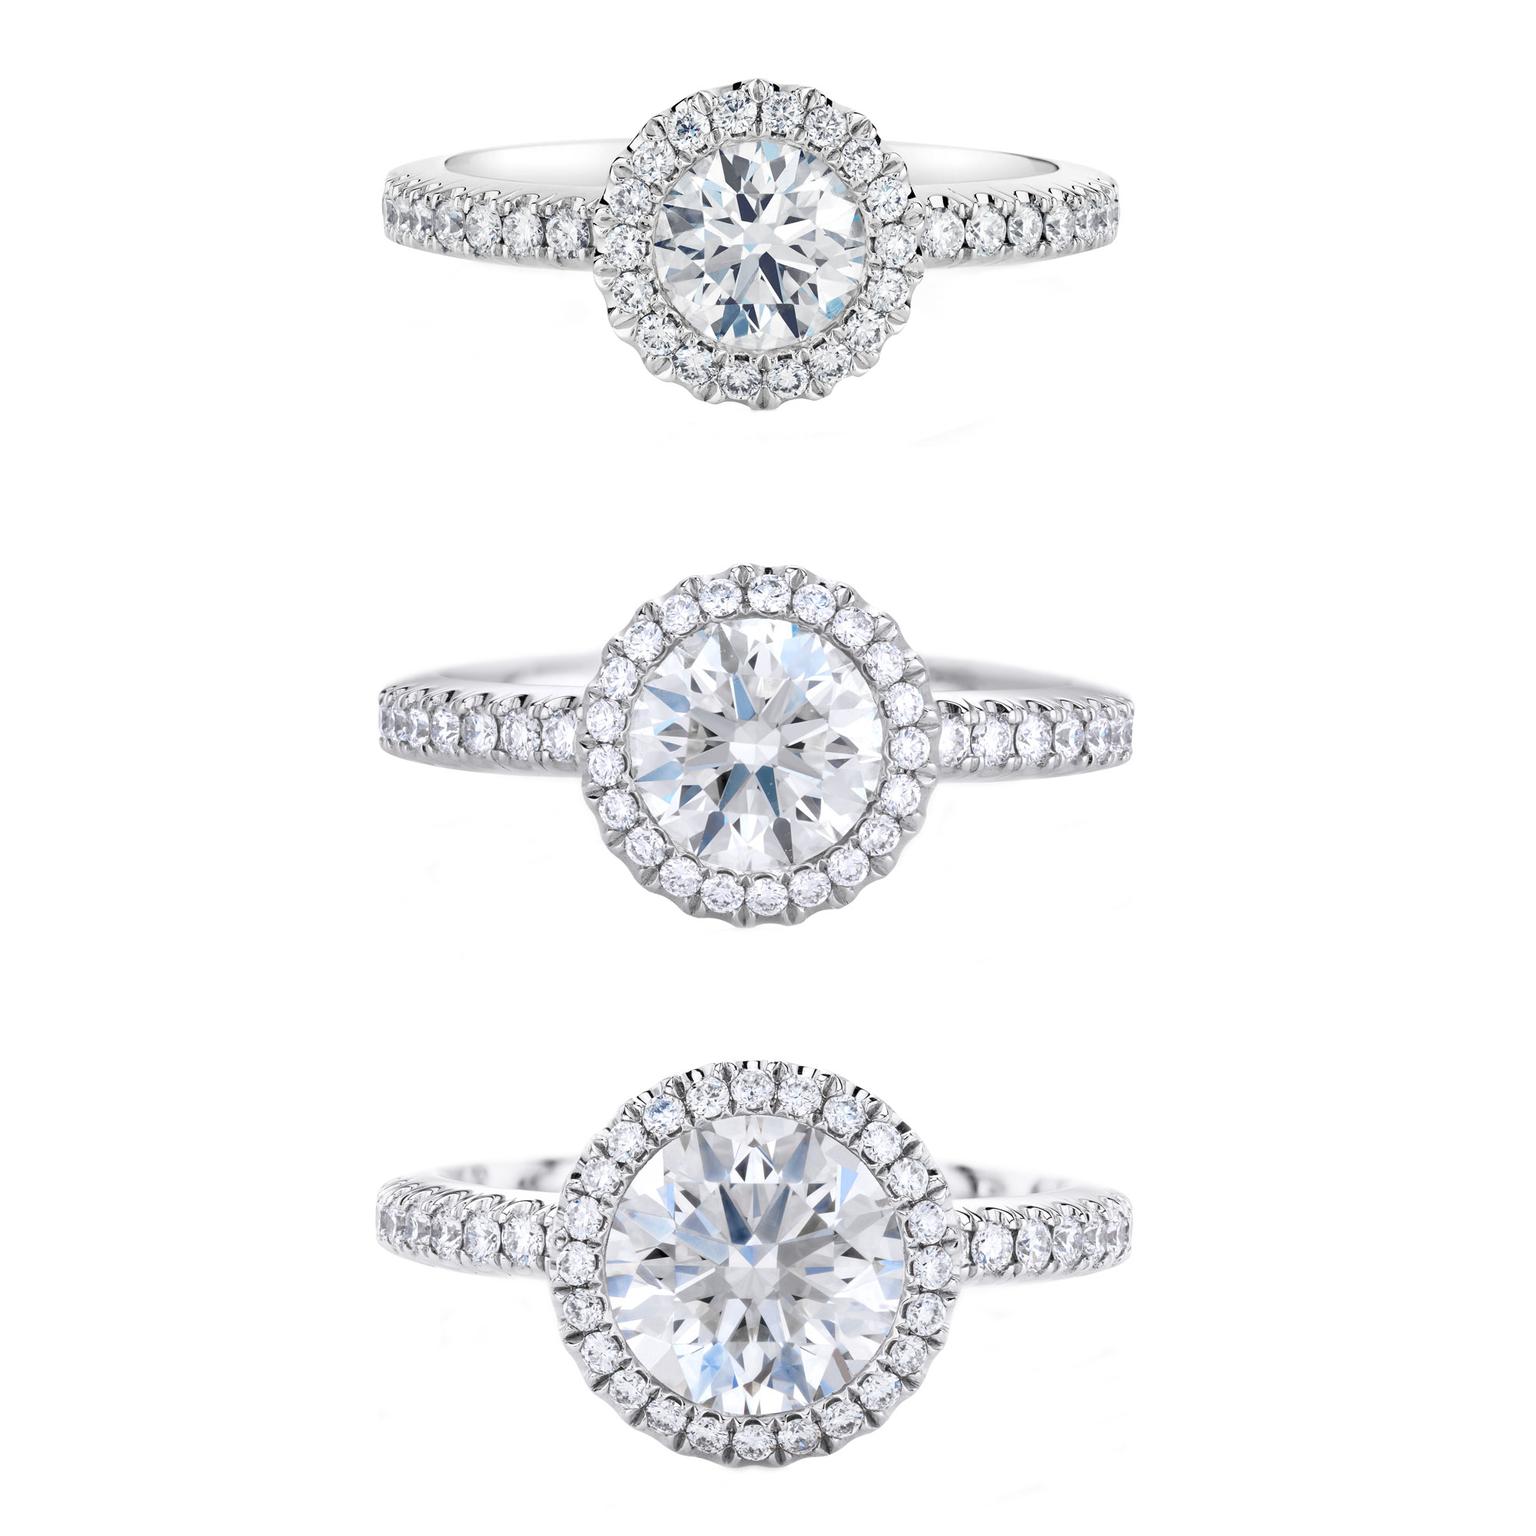 De Beers Aura diamond engagement rings 1ct, 1.5ct and 2ct